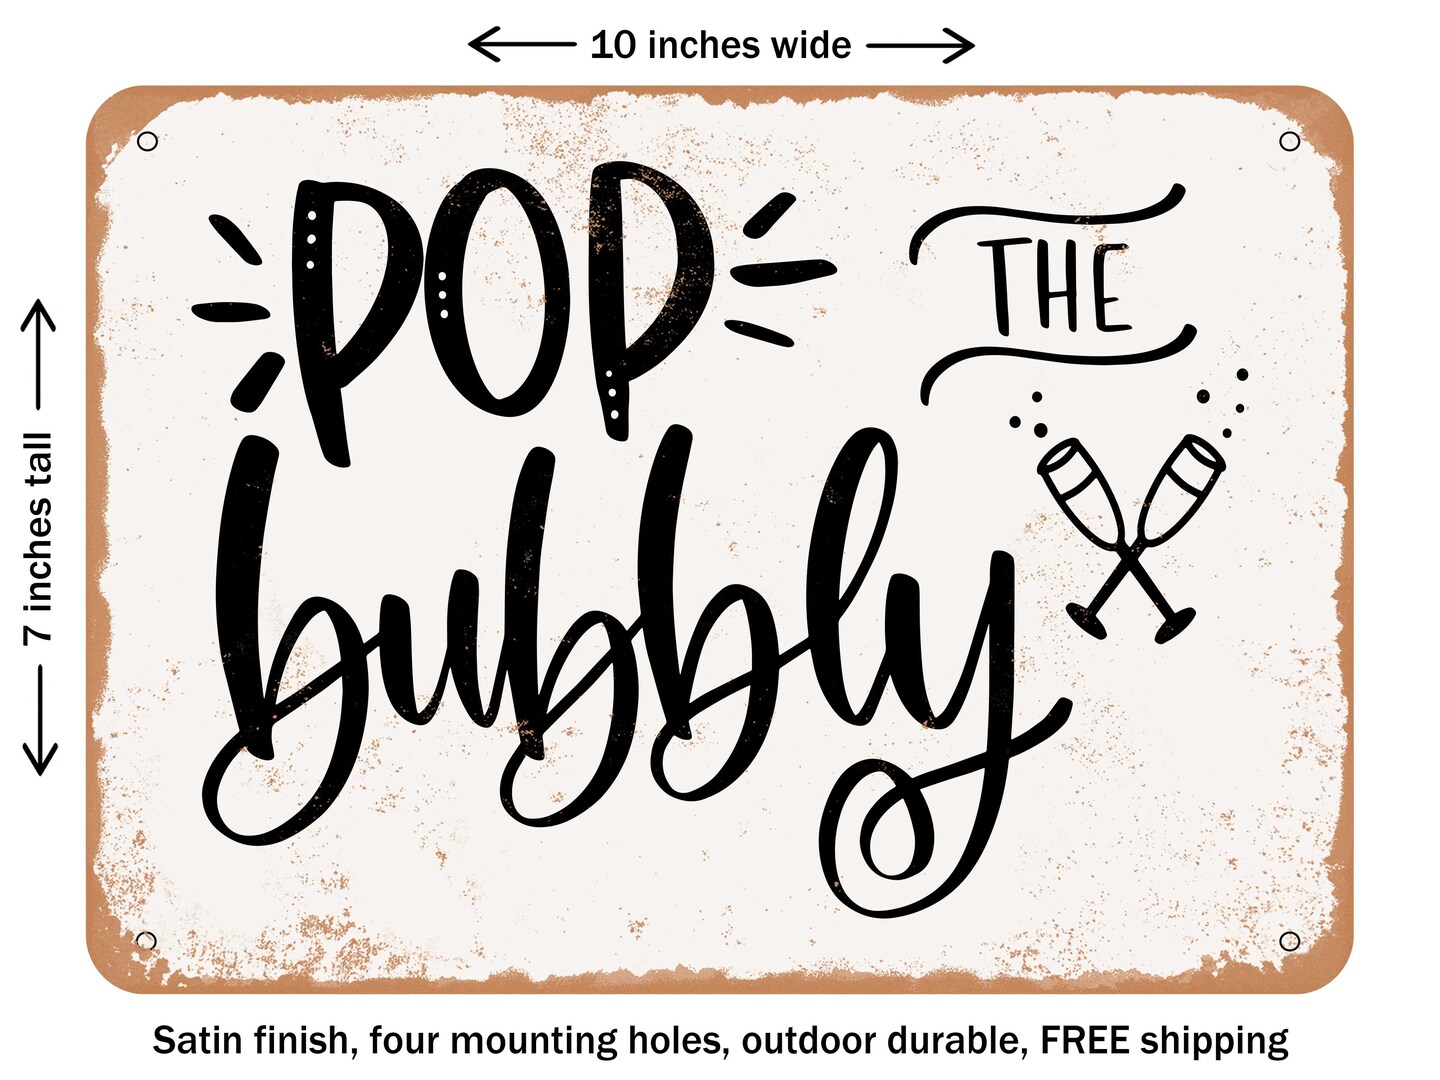 DECORATIVE METAL SIGN - Pop the Bubbly - Vintage Rusty Look